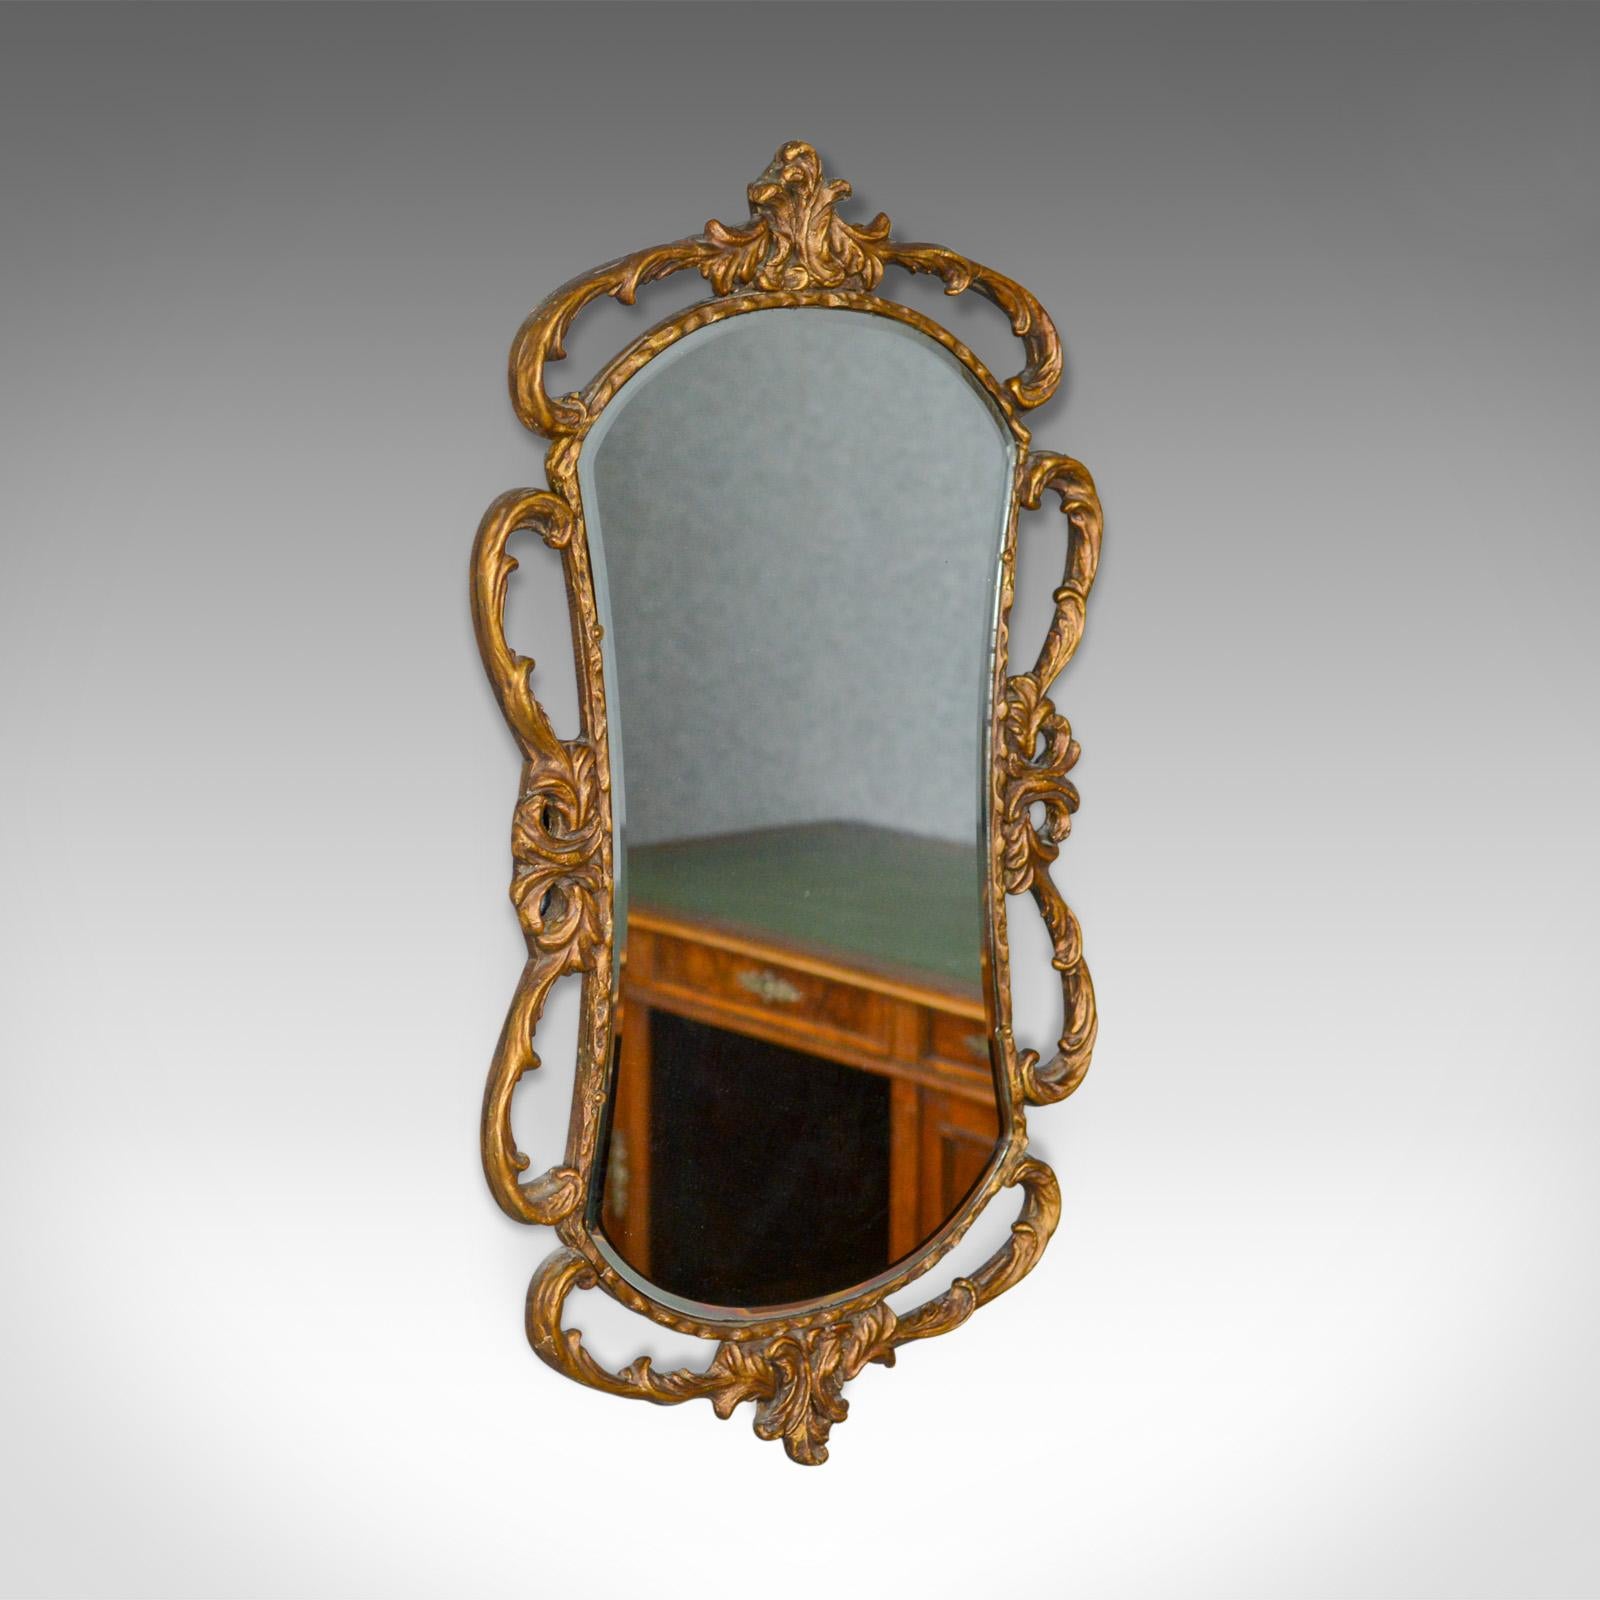 This is an antique wall mirror, an English, Victorian, gilt gesso mirror in the classical taste dating to the latter part of the 19th century, circa 1880.

Typically Victorian elaborate and elegant design
Gilt gesso frame featuring scrolls and